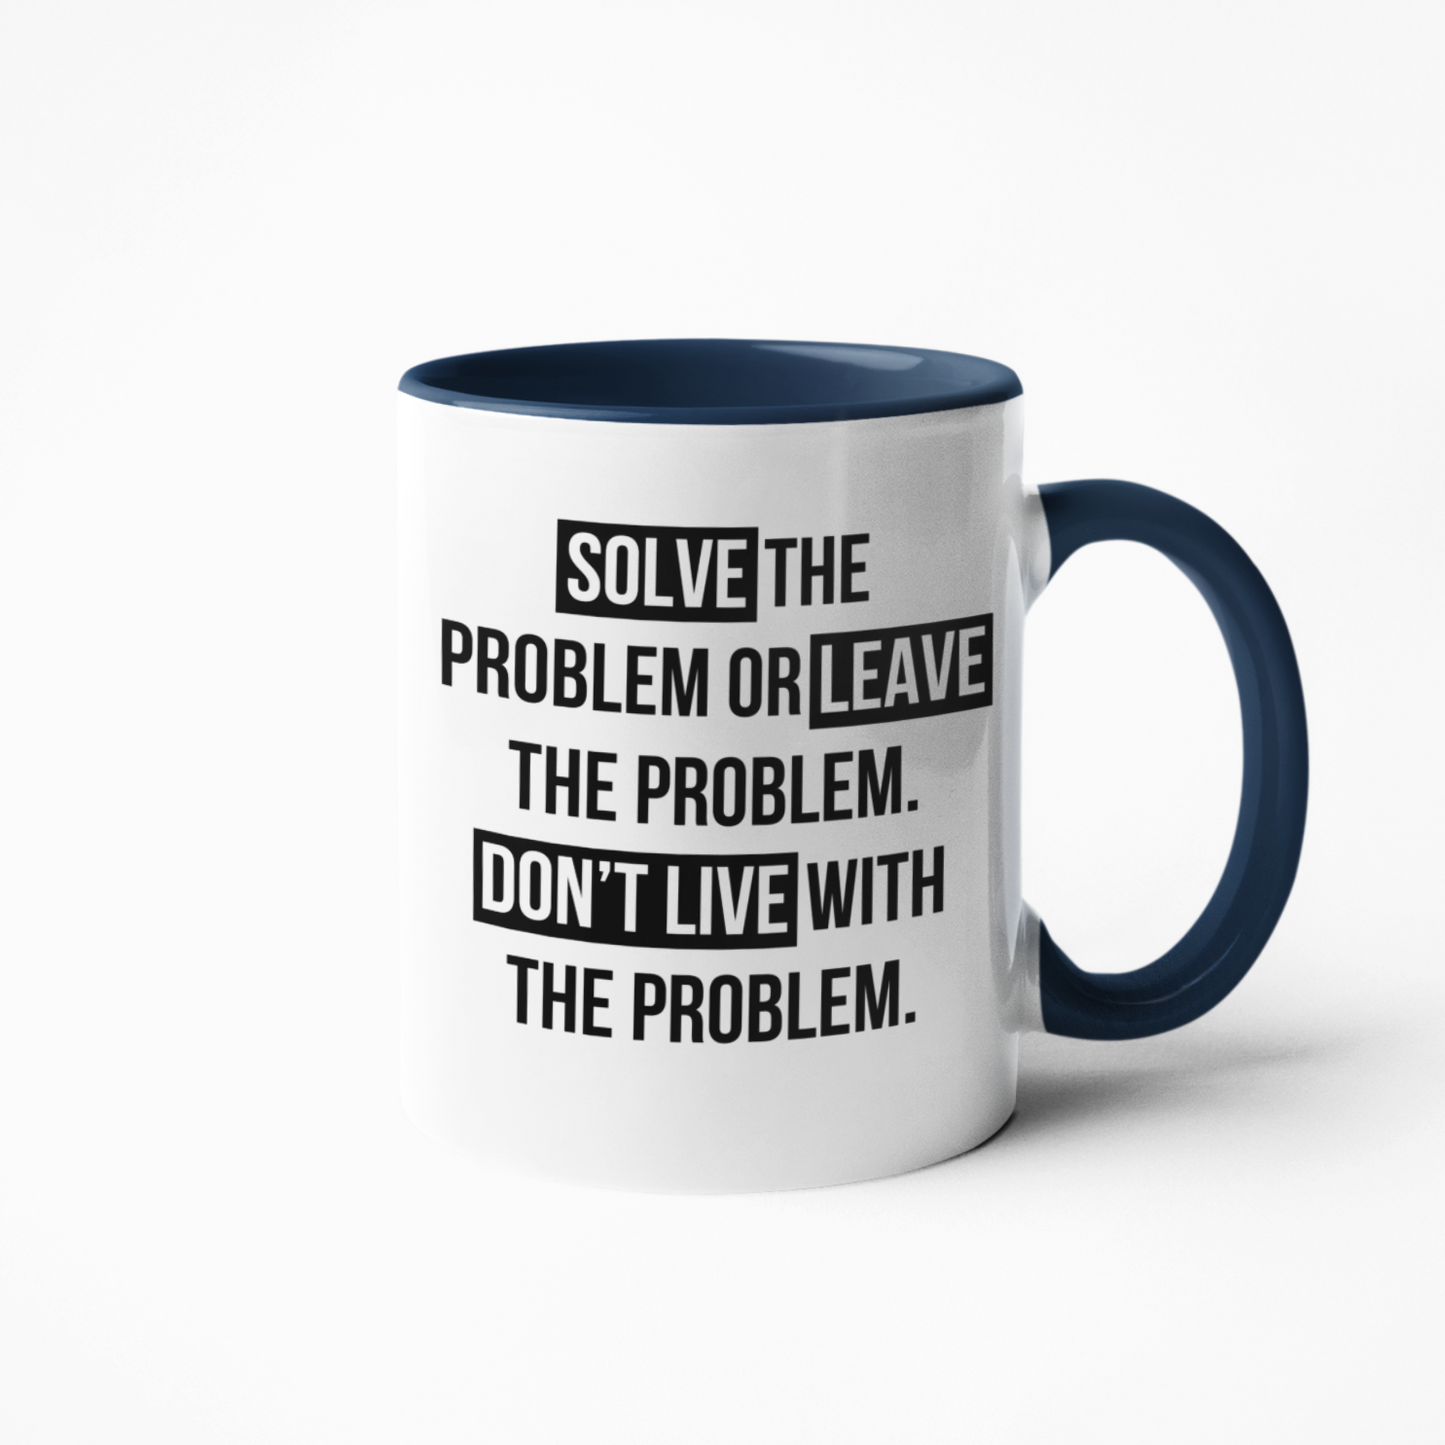 Tasse »Solve the problem or leave the problem. Don’t live with the problem.«